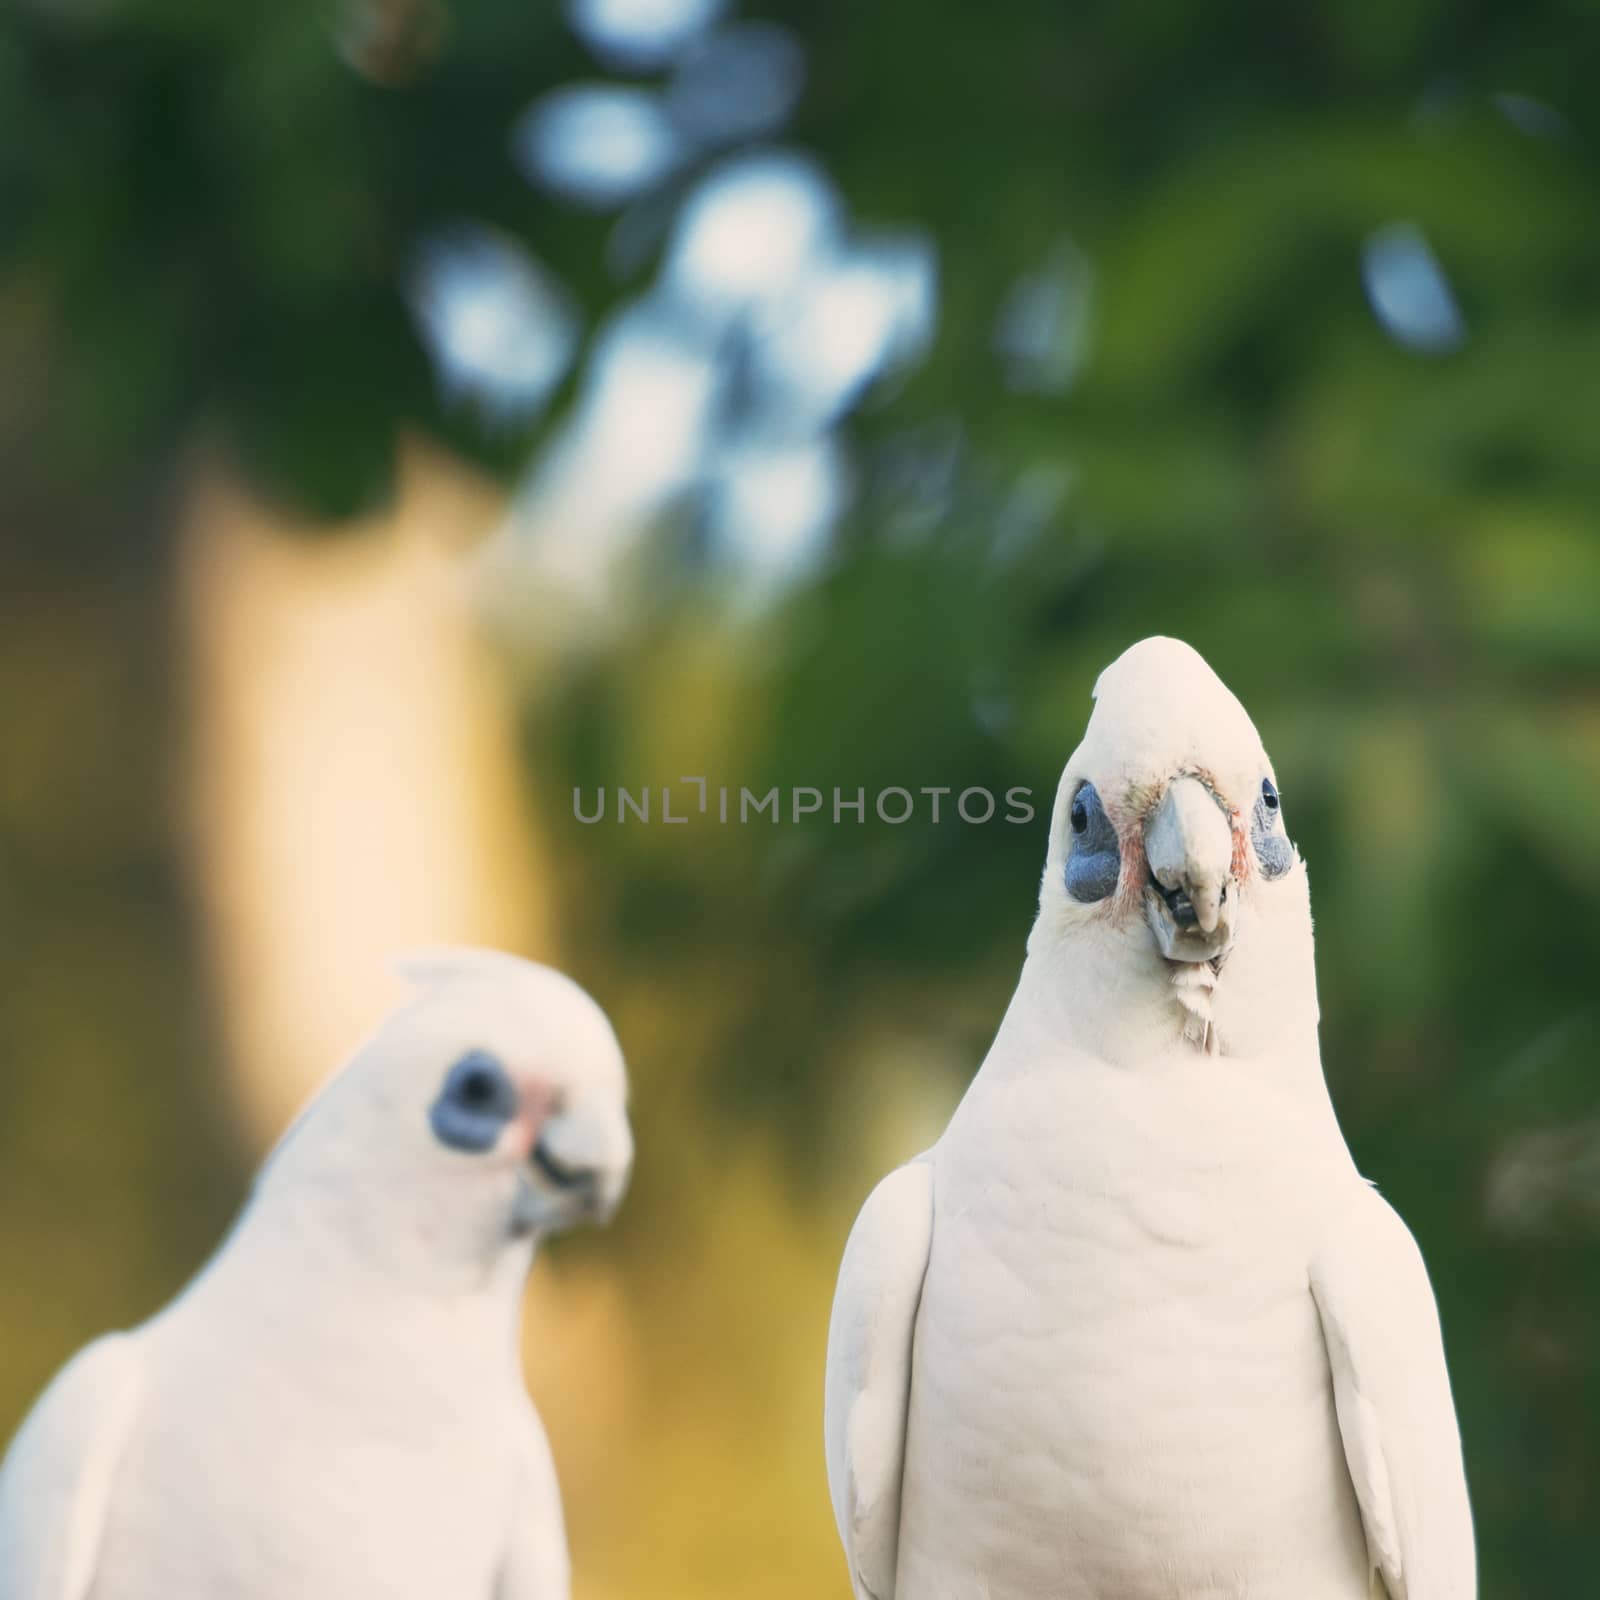 Beautiful white corellas outside during the afternoon. 